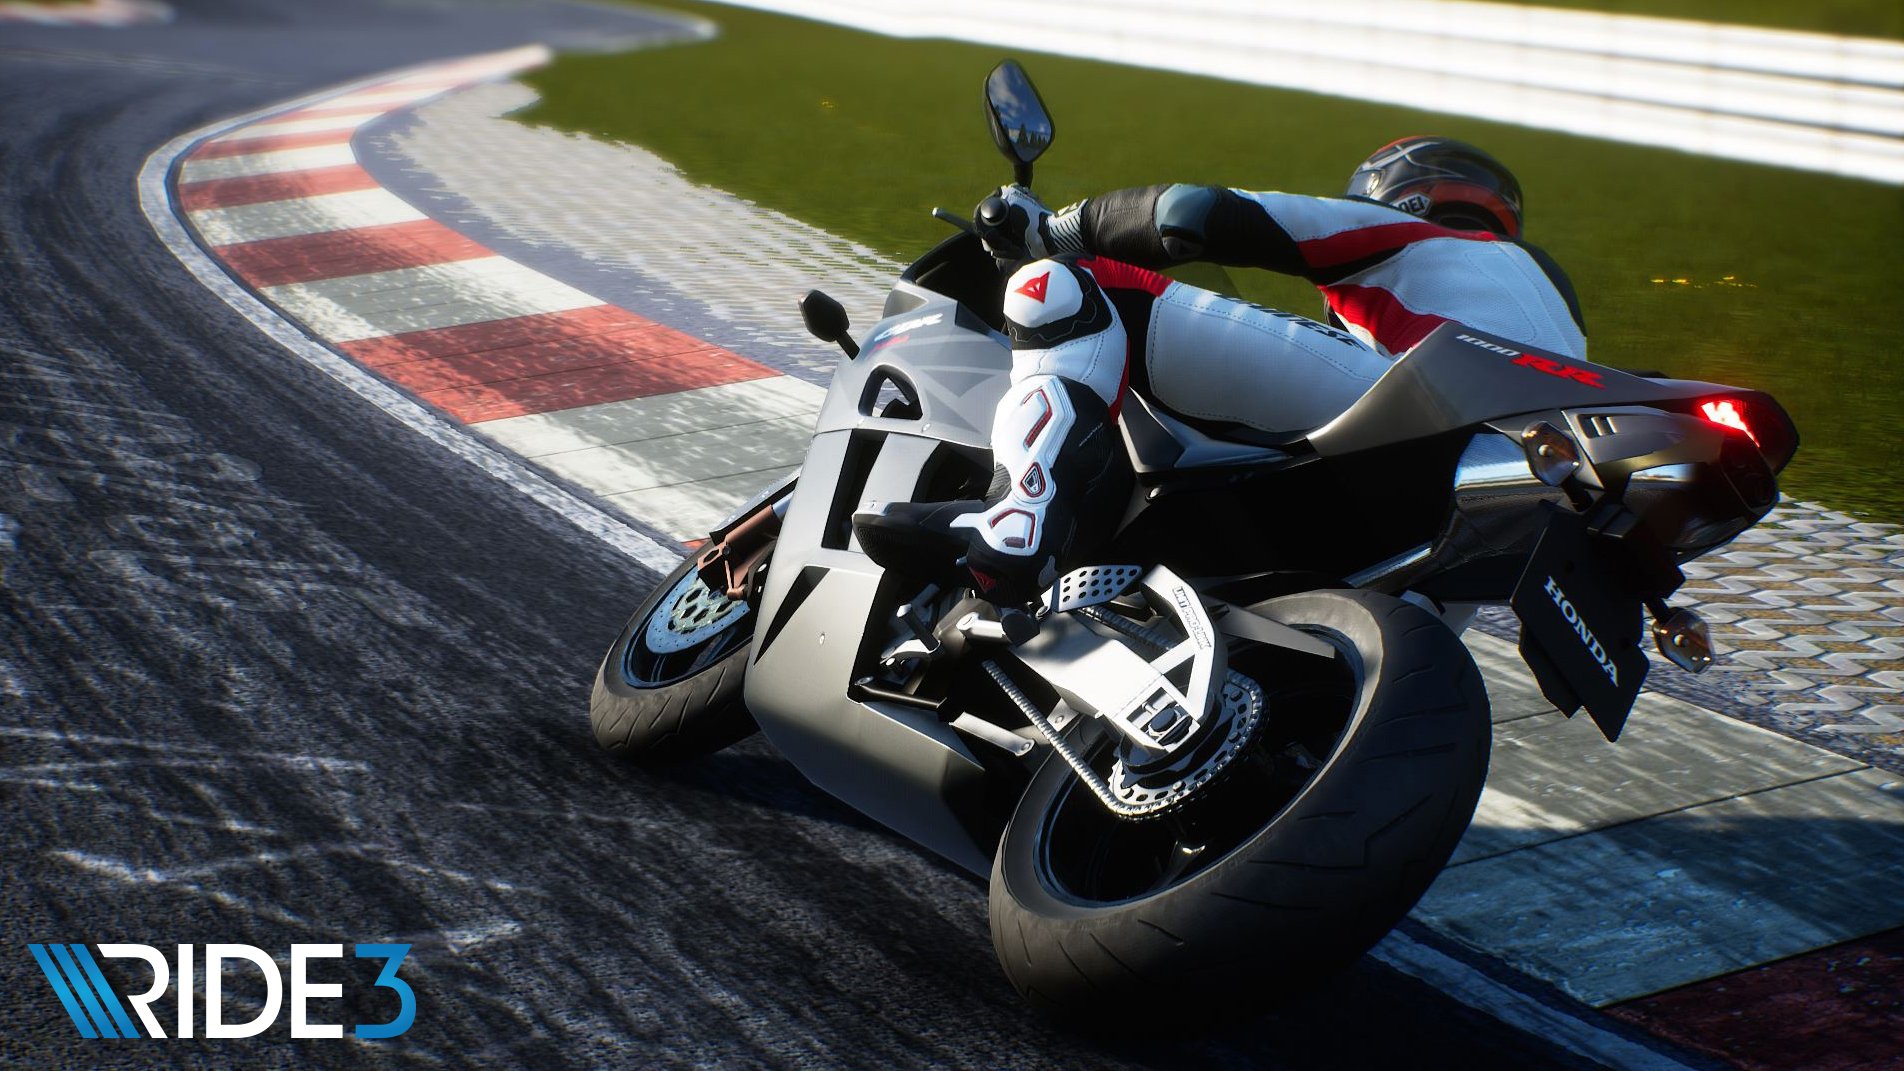 Ride 3 List Of Over 230 Bikes Available Inside Sim Racing